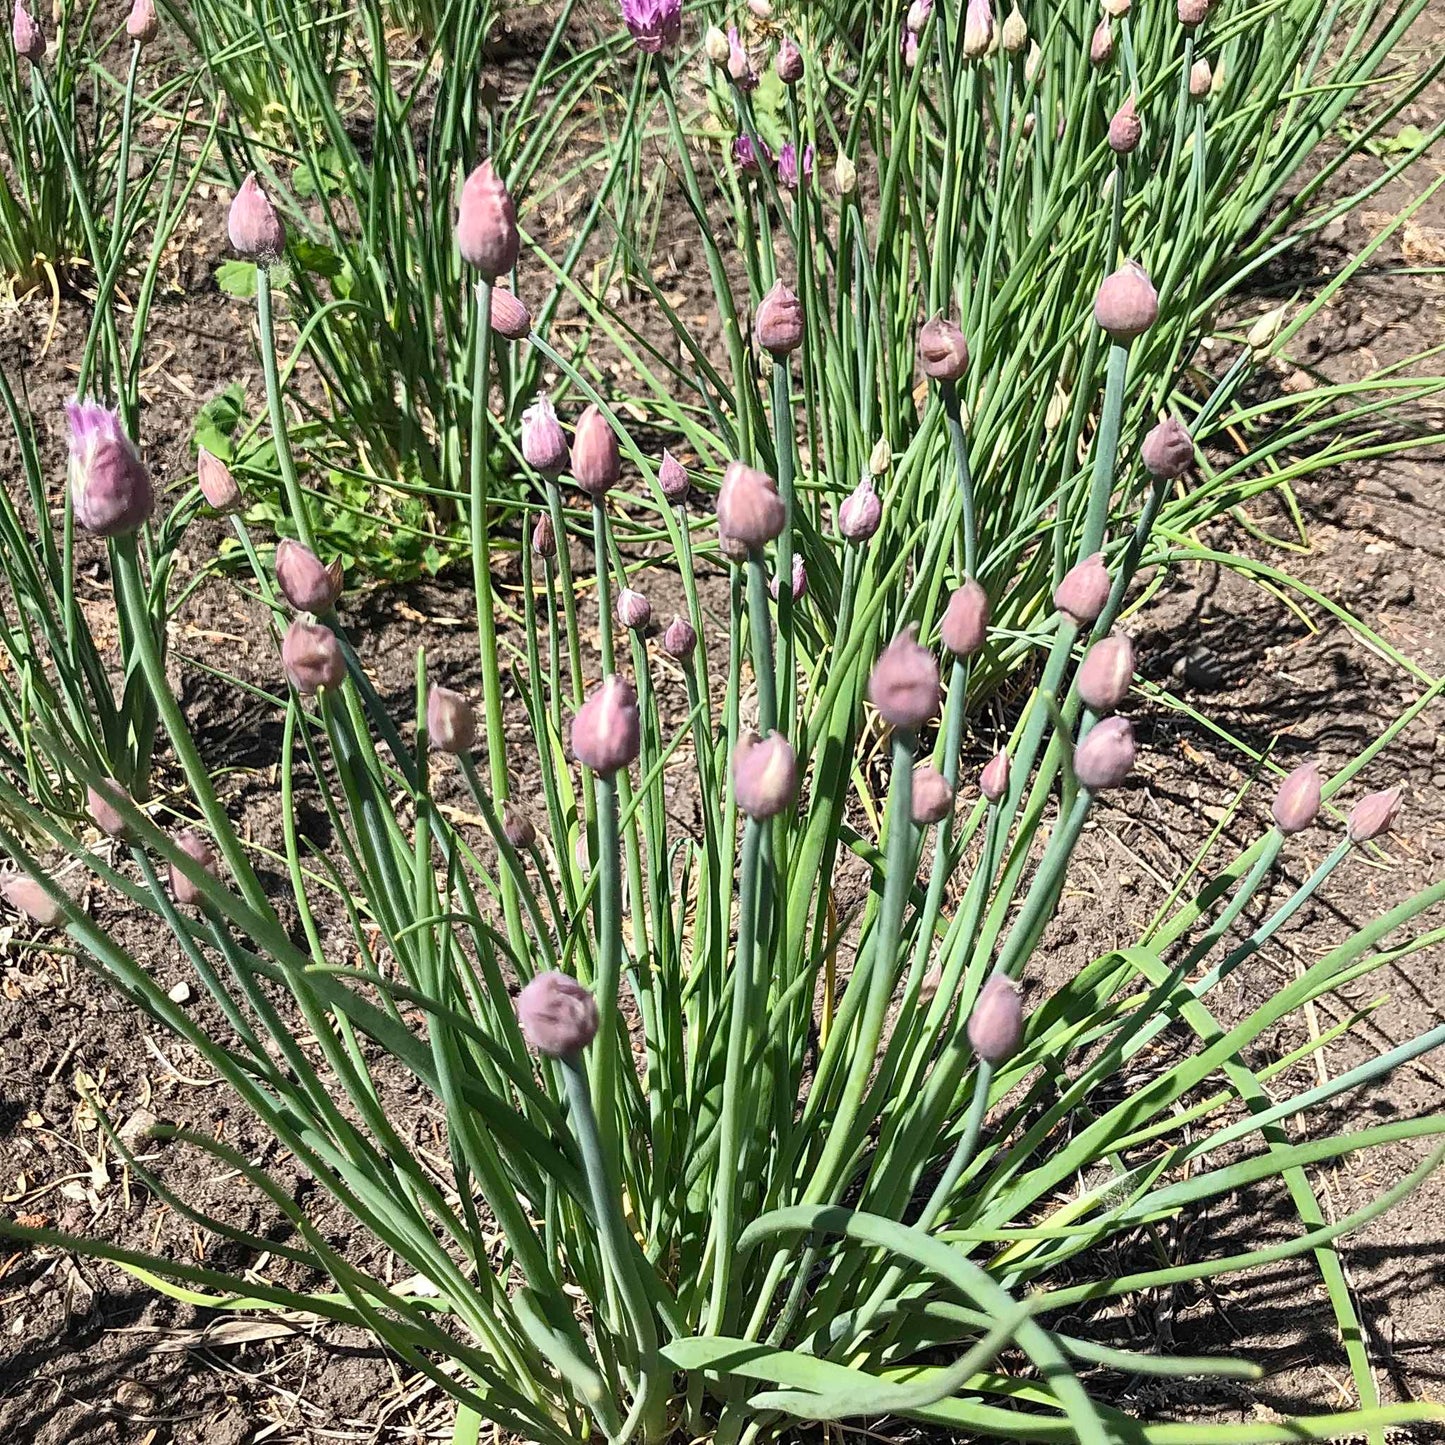 Chives with flower buds just about to open.